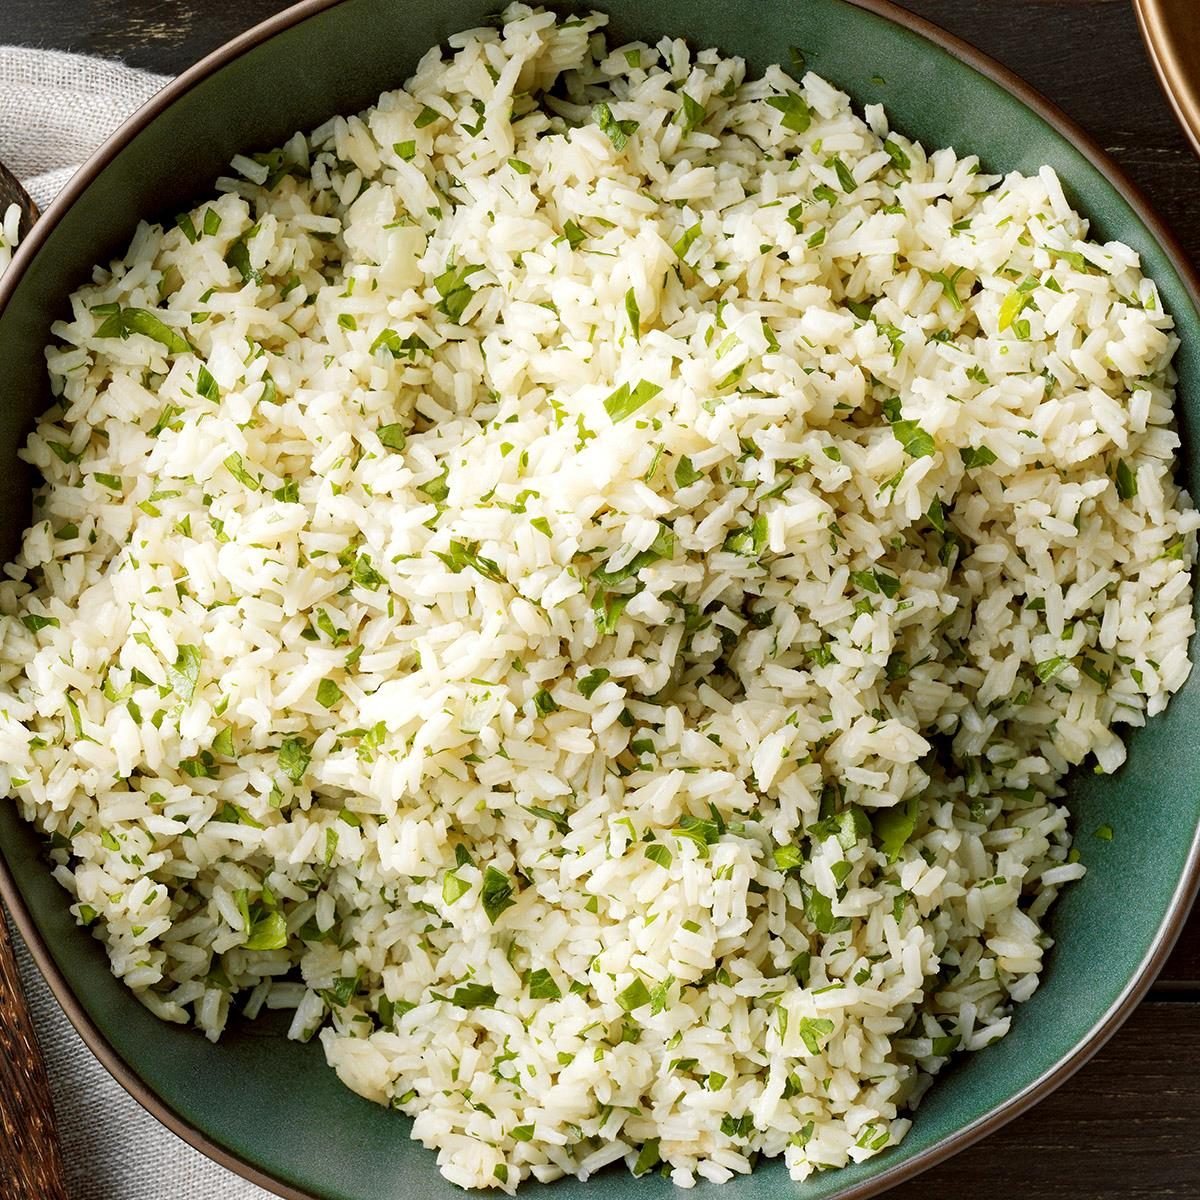 Flavorful Green Rice Exps Tgbz22 15322 Dr 05 04 4b